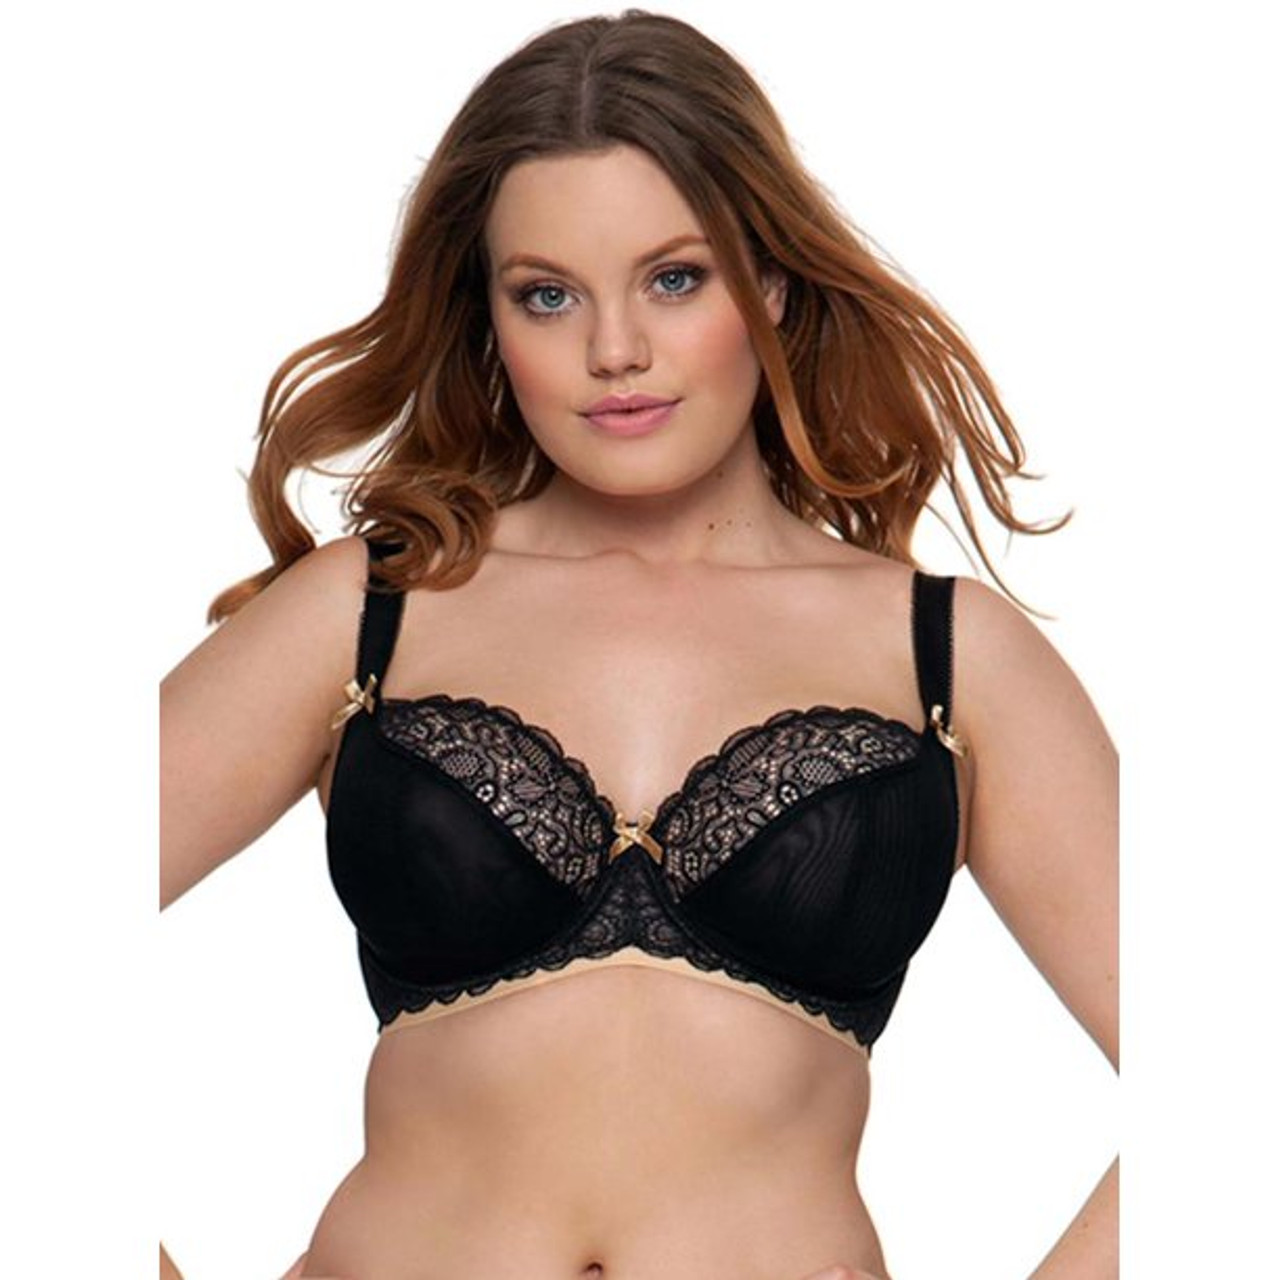 Curvy Kate Women's Ellace Balcony Bra, Black Champagne, 28HH at   Women's Clothing store